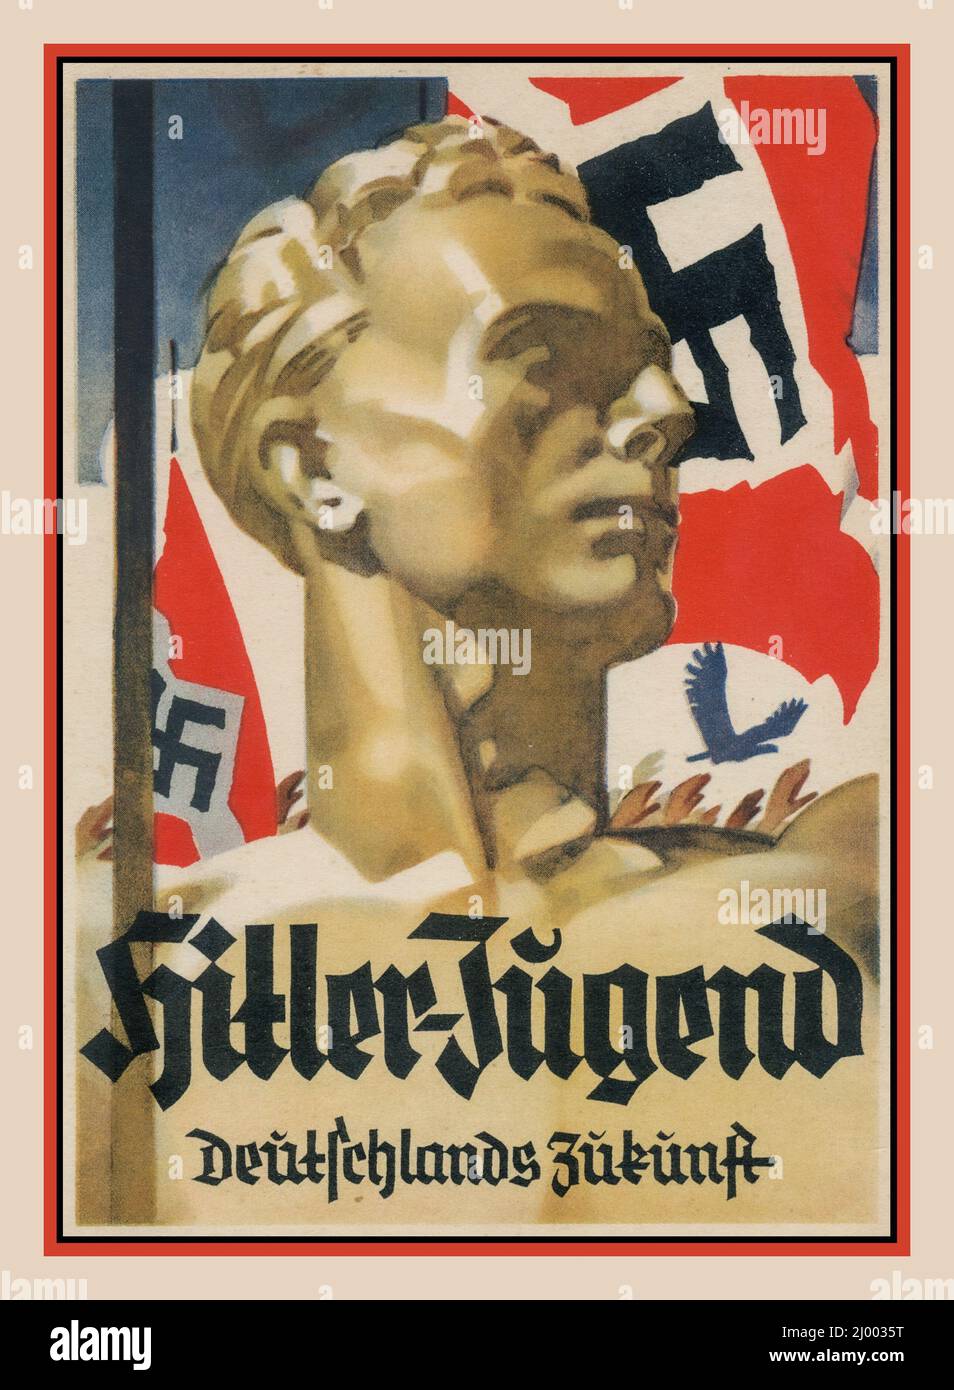 Nazi Hitler-Jugend 1930s Nazi Germany Hitler Youth Propaganda card poster with Swastika flag and Titled HITLER-JUGEND  Deutschlands Zukunft, Germany's Future. Blond fit aryan youth featured as the perfect Nazi Germany ideal Stock Photo